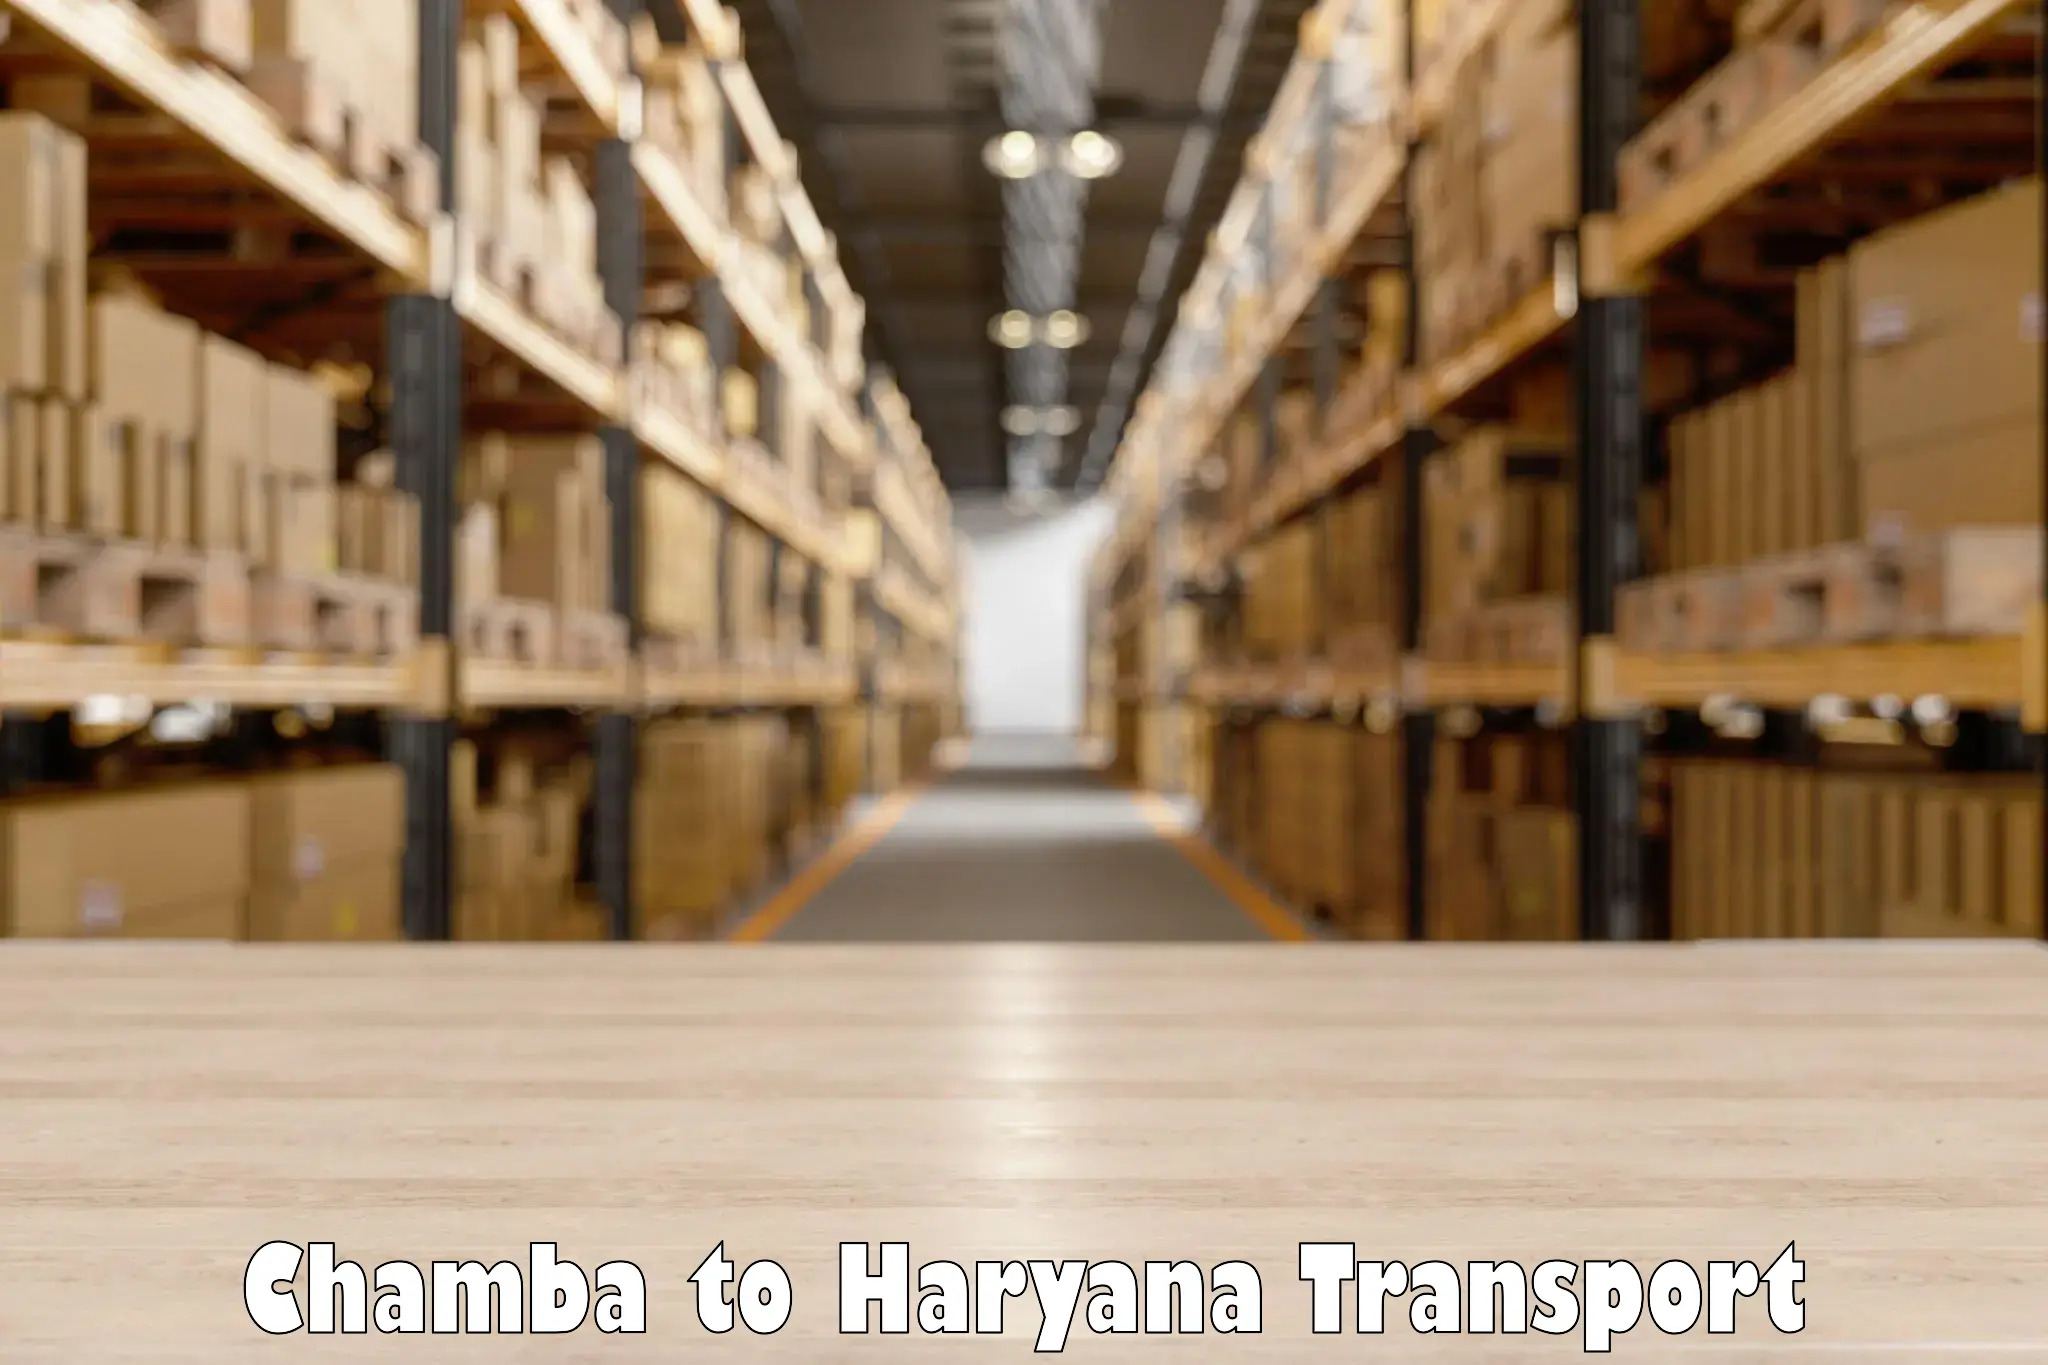 Commercial transport service Chamba to Barwala